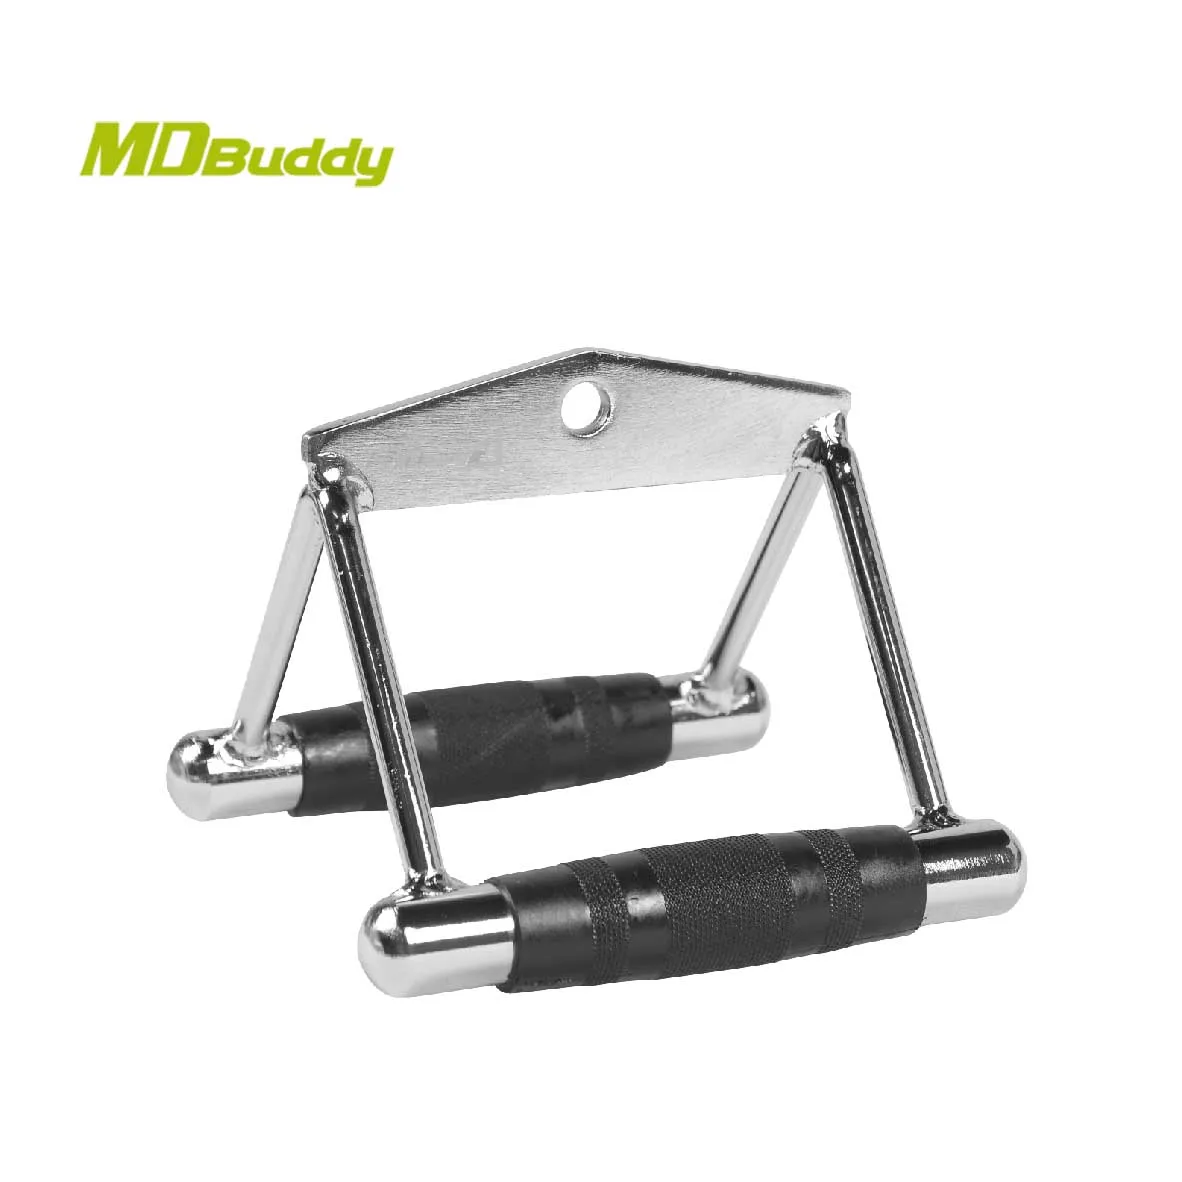 Mdbuddy Gym Equipment Steel Pulley Handle Cable Machine Attachments ...